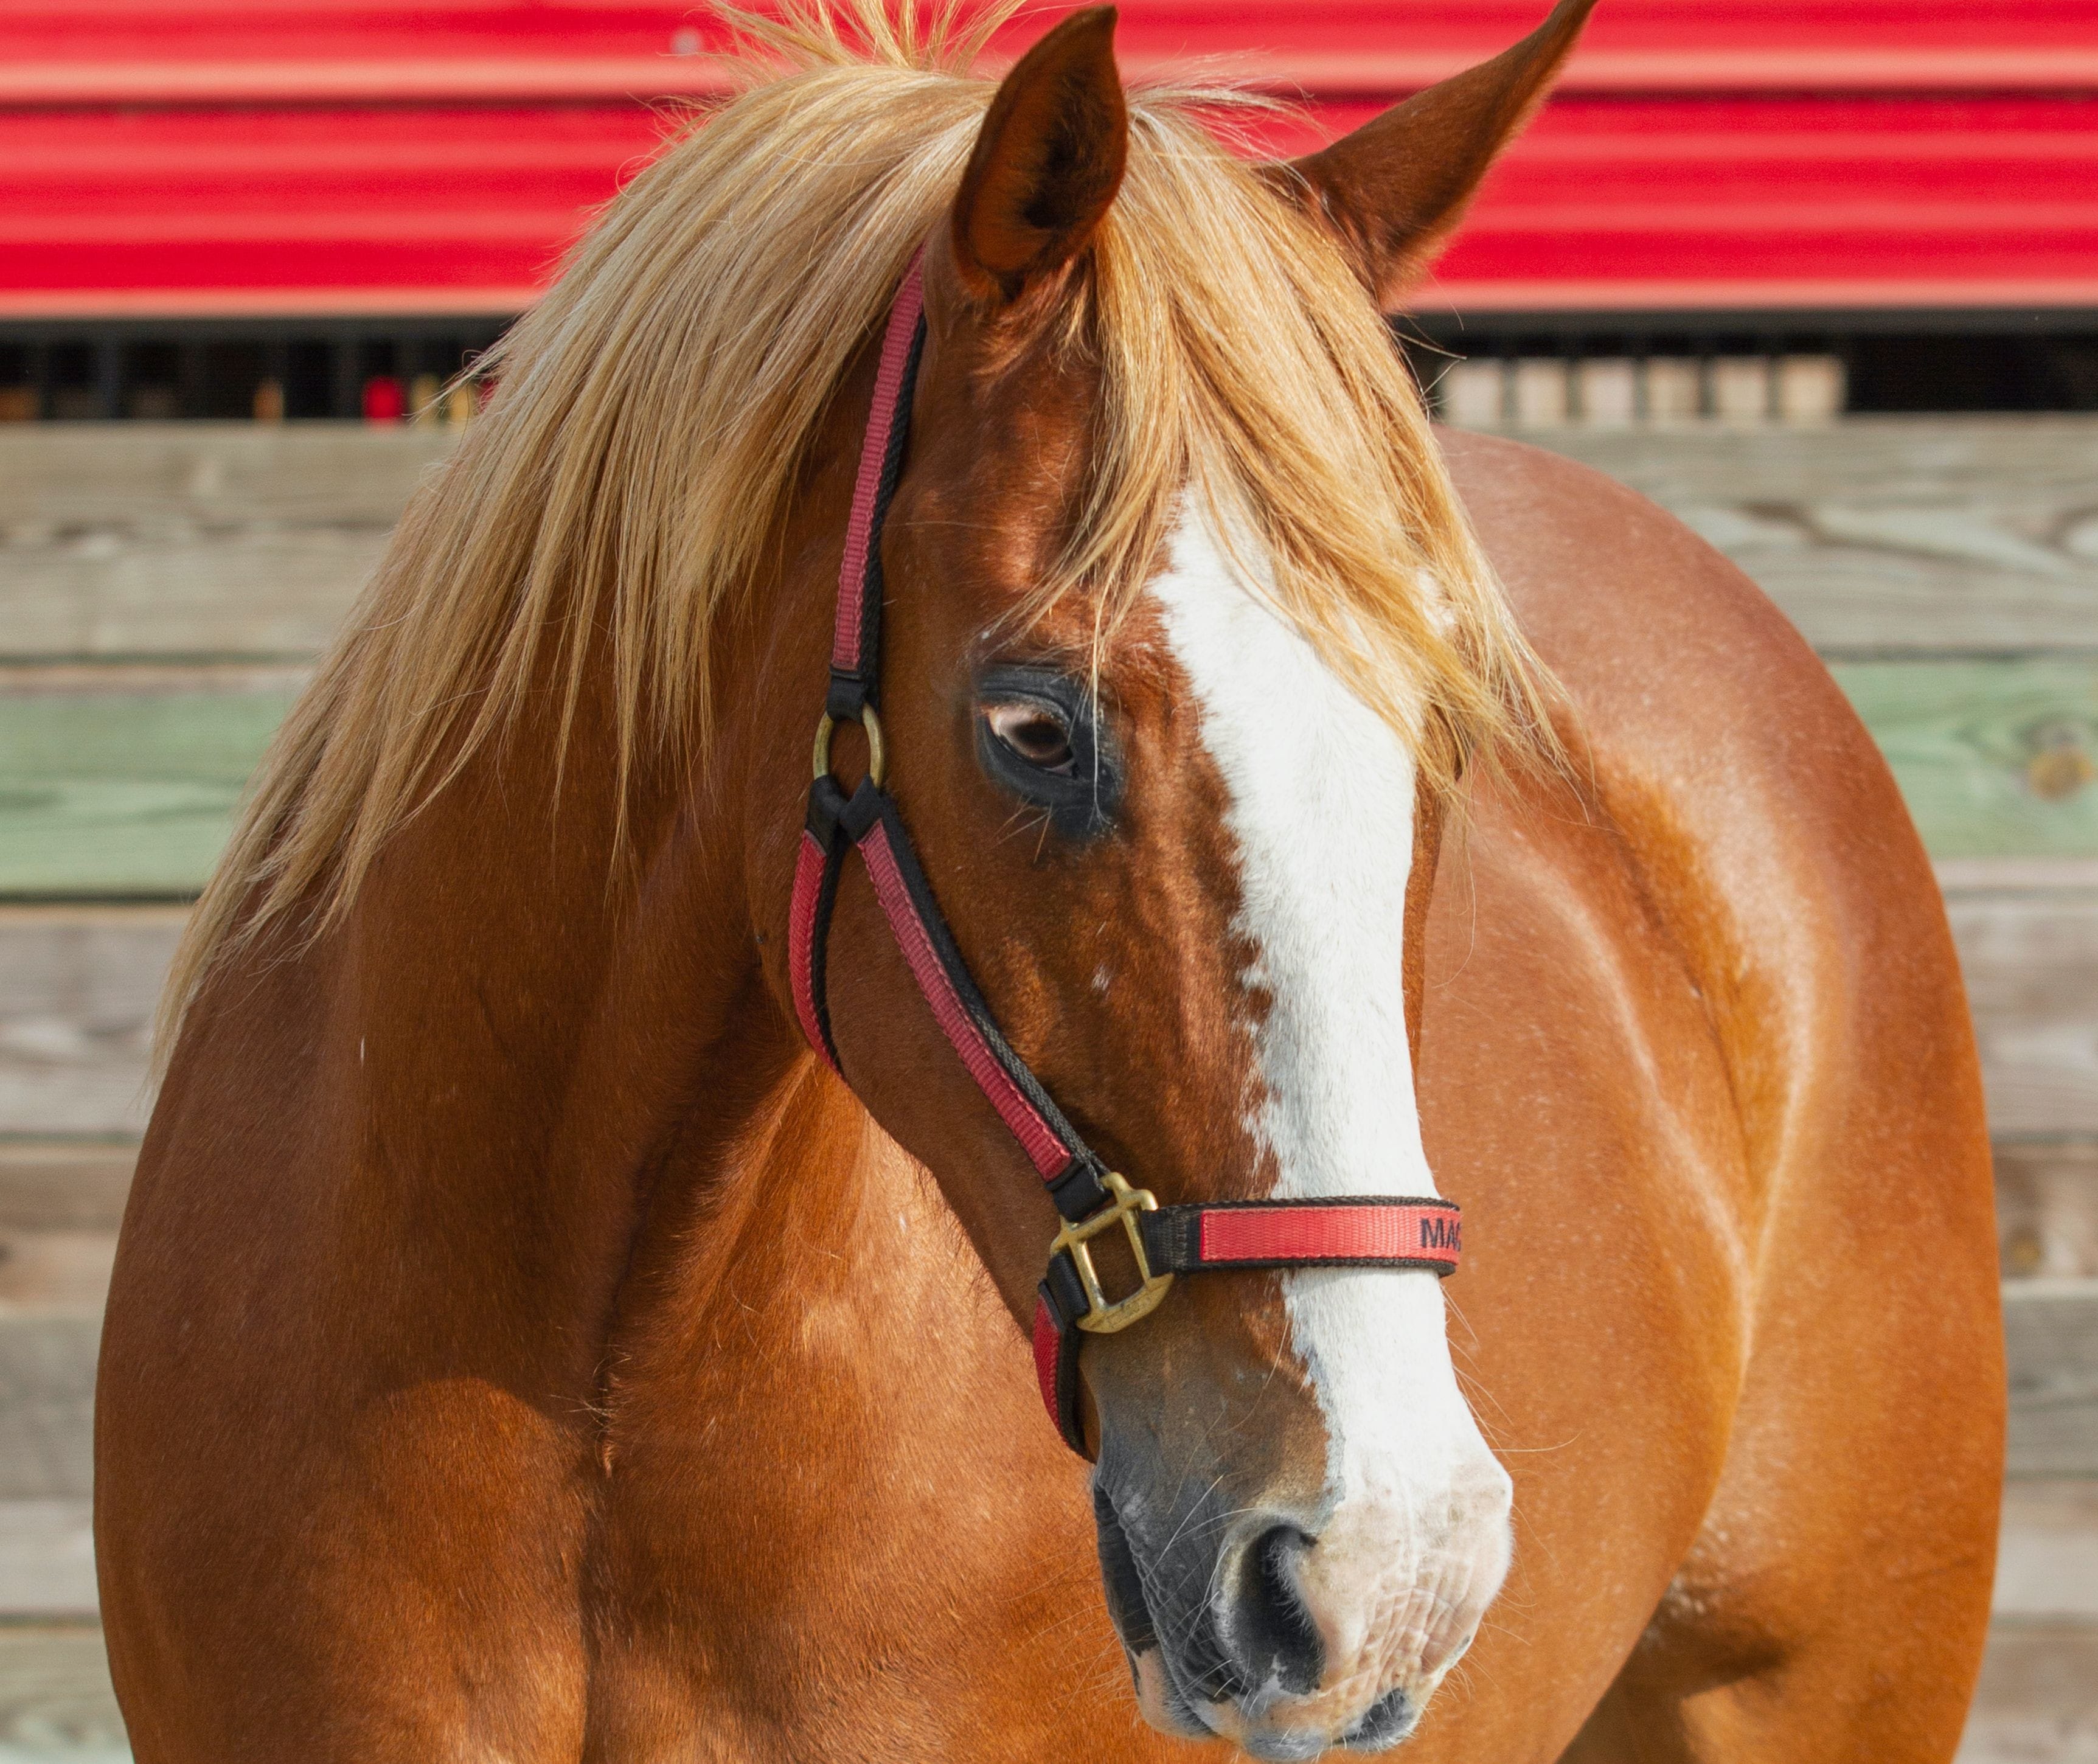 Mac is a lesson horse at J & S Performance Horses. He is a sorrel gelding with a blaze and flaxen mane, wearing a red and black halter with his name on it.